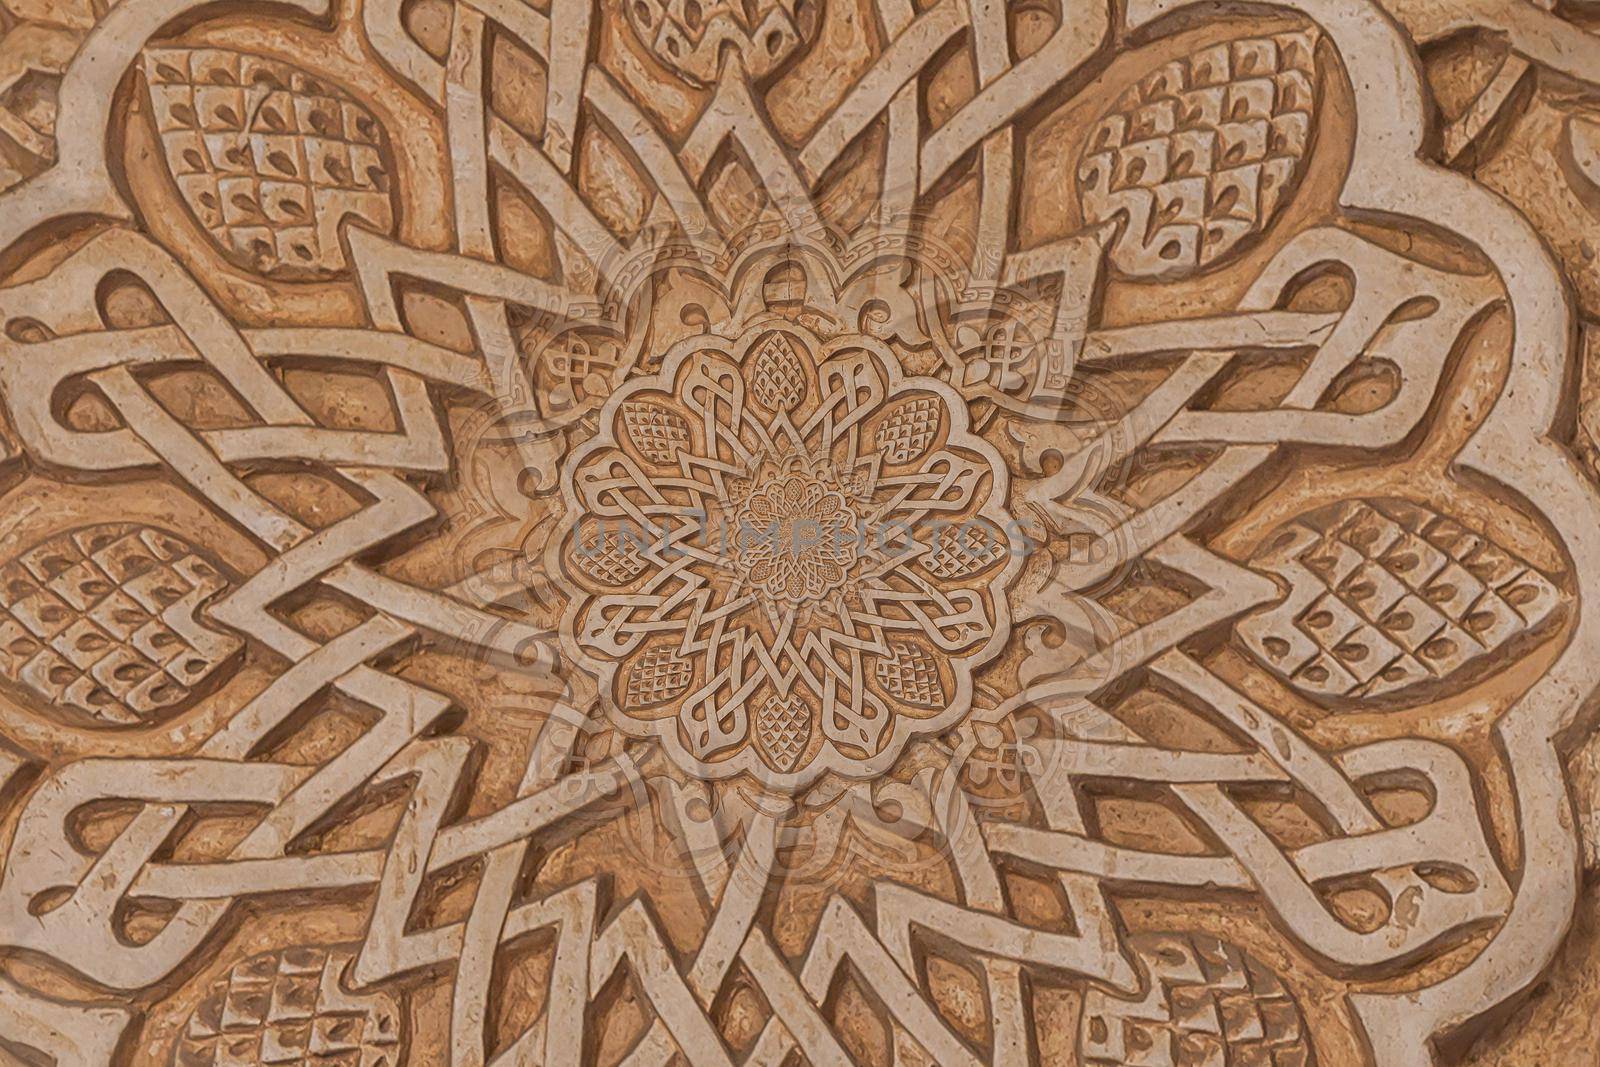 Arab background remanding to Islam culture. Design created using droste effect on a 13th century architectural detail in a mosque. by Perseomedusa